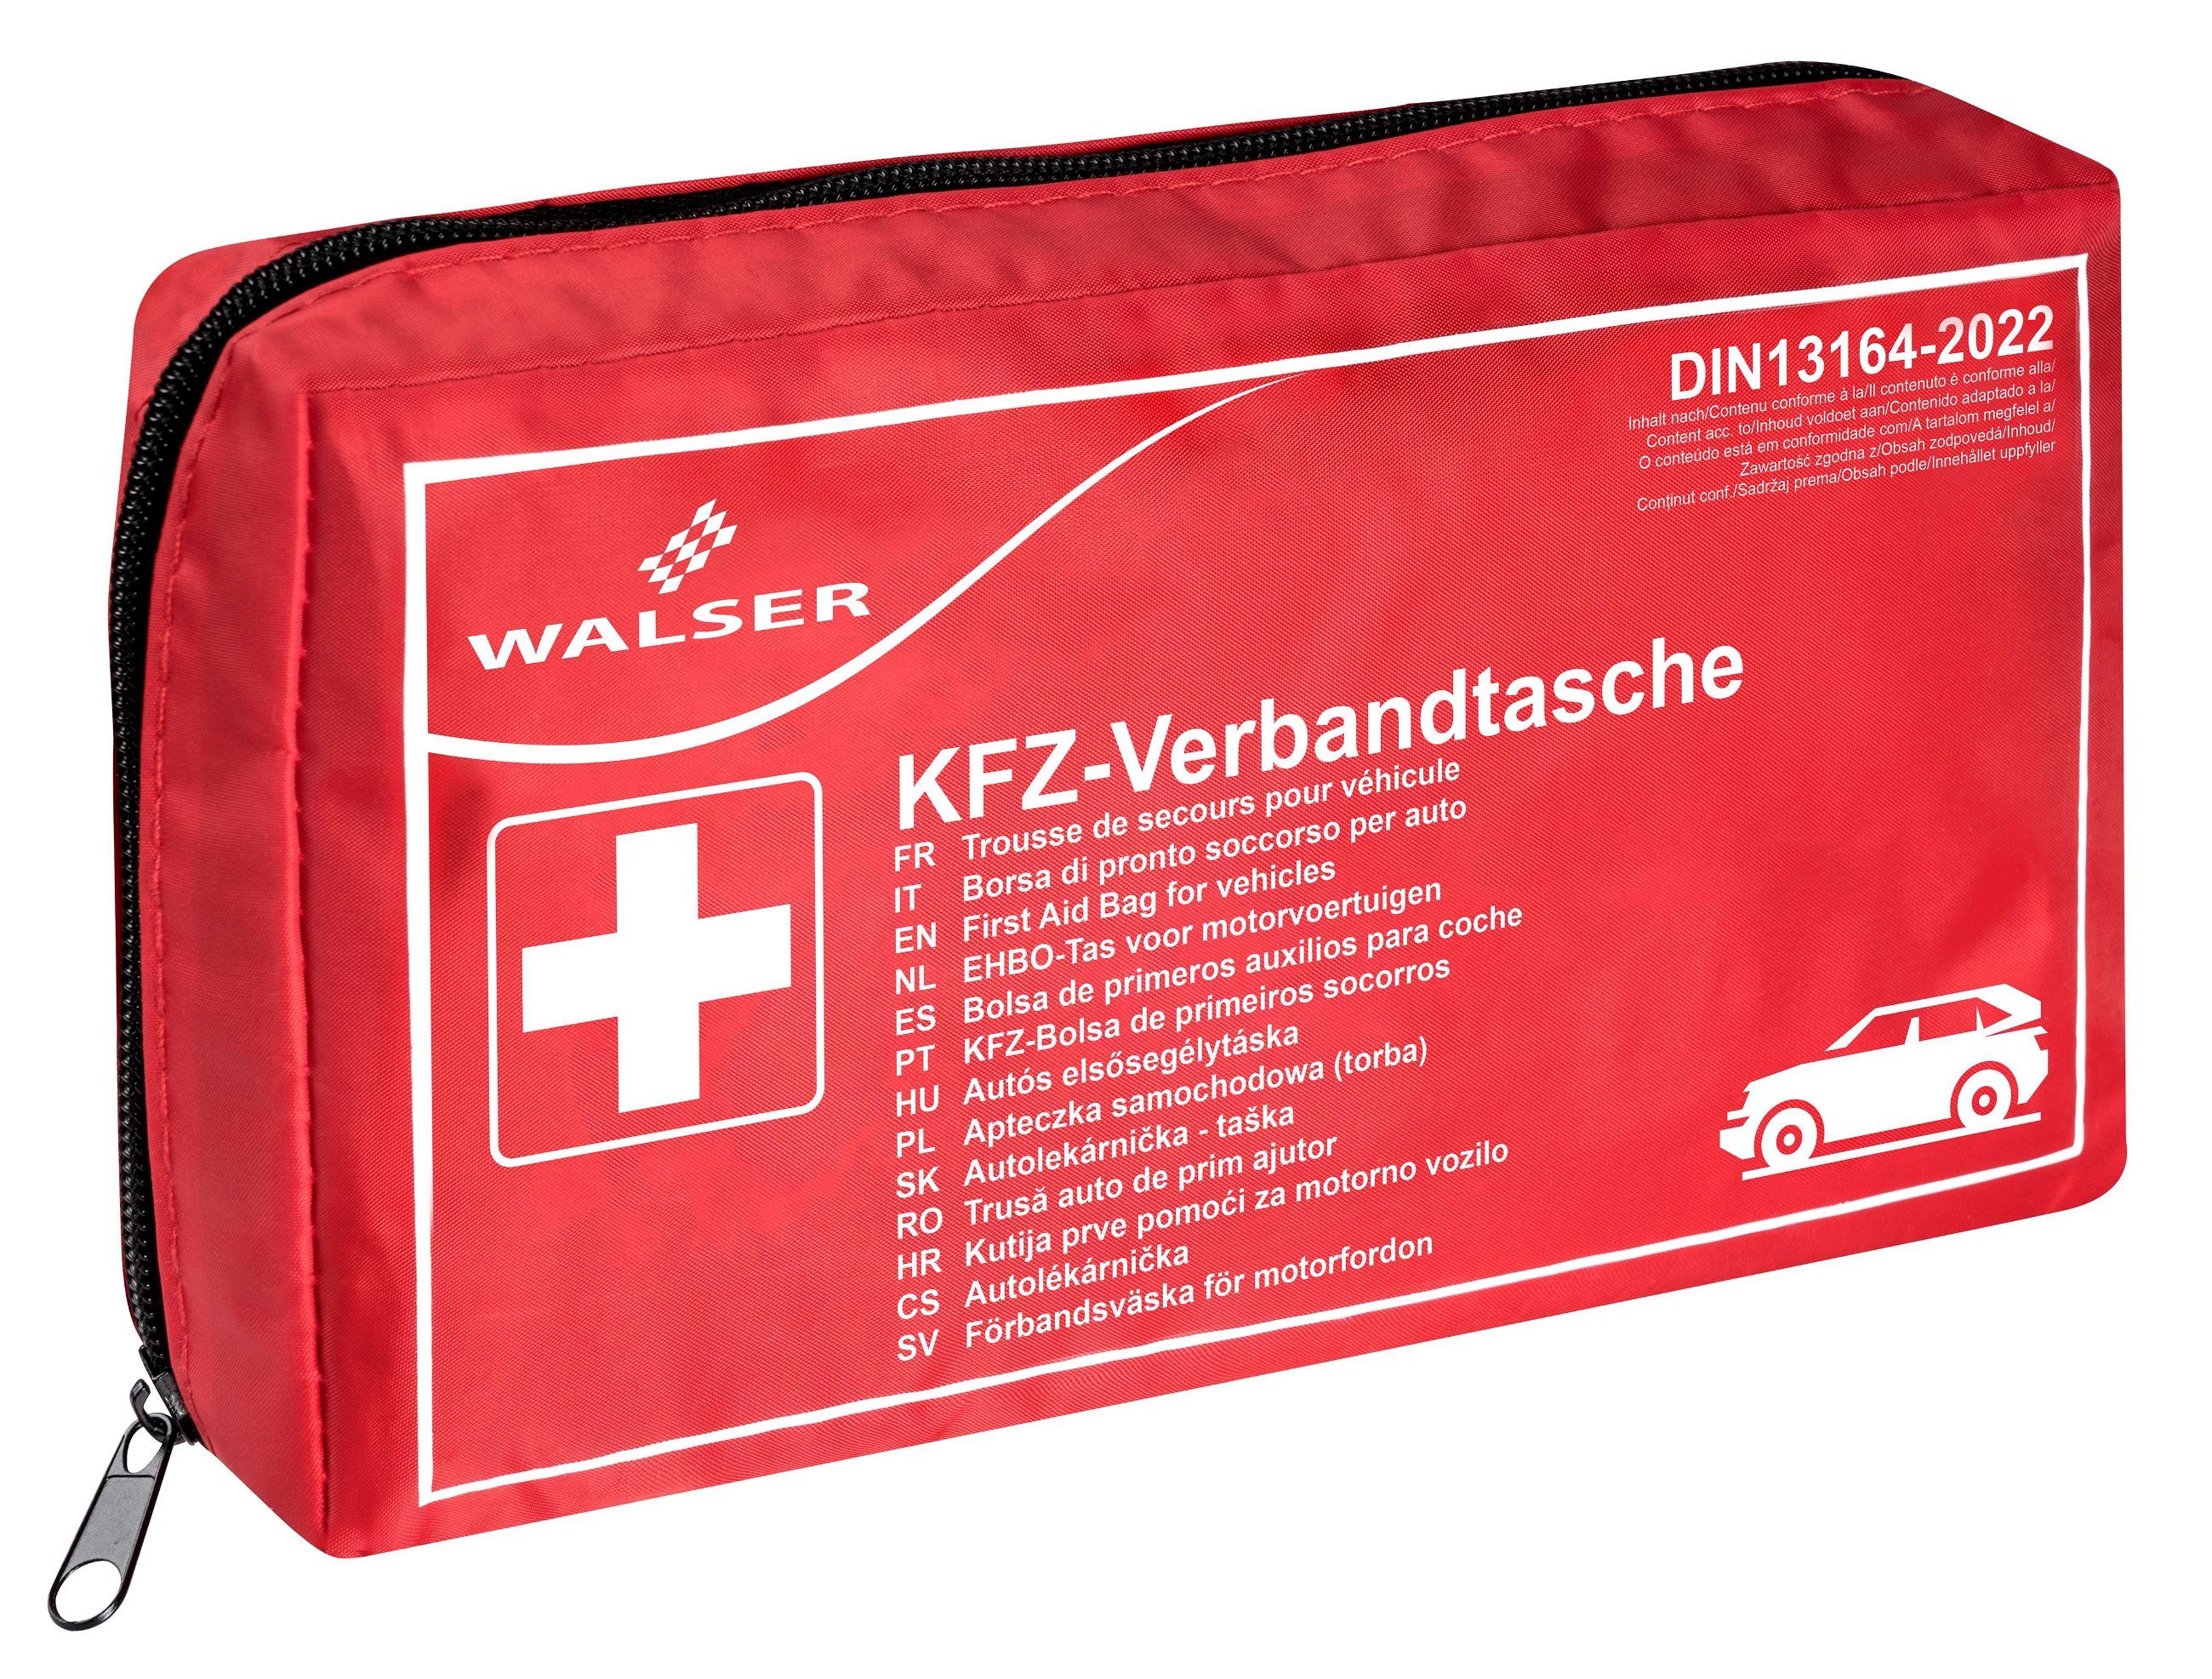 Red first aid kit for the car, compliant with DIN 13164:2022, car first aid kit, red car emergency kit